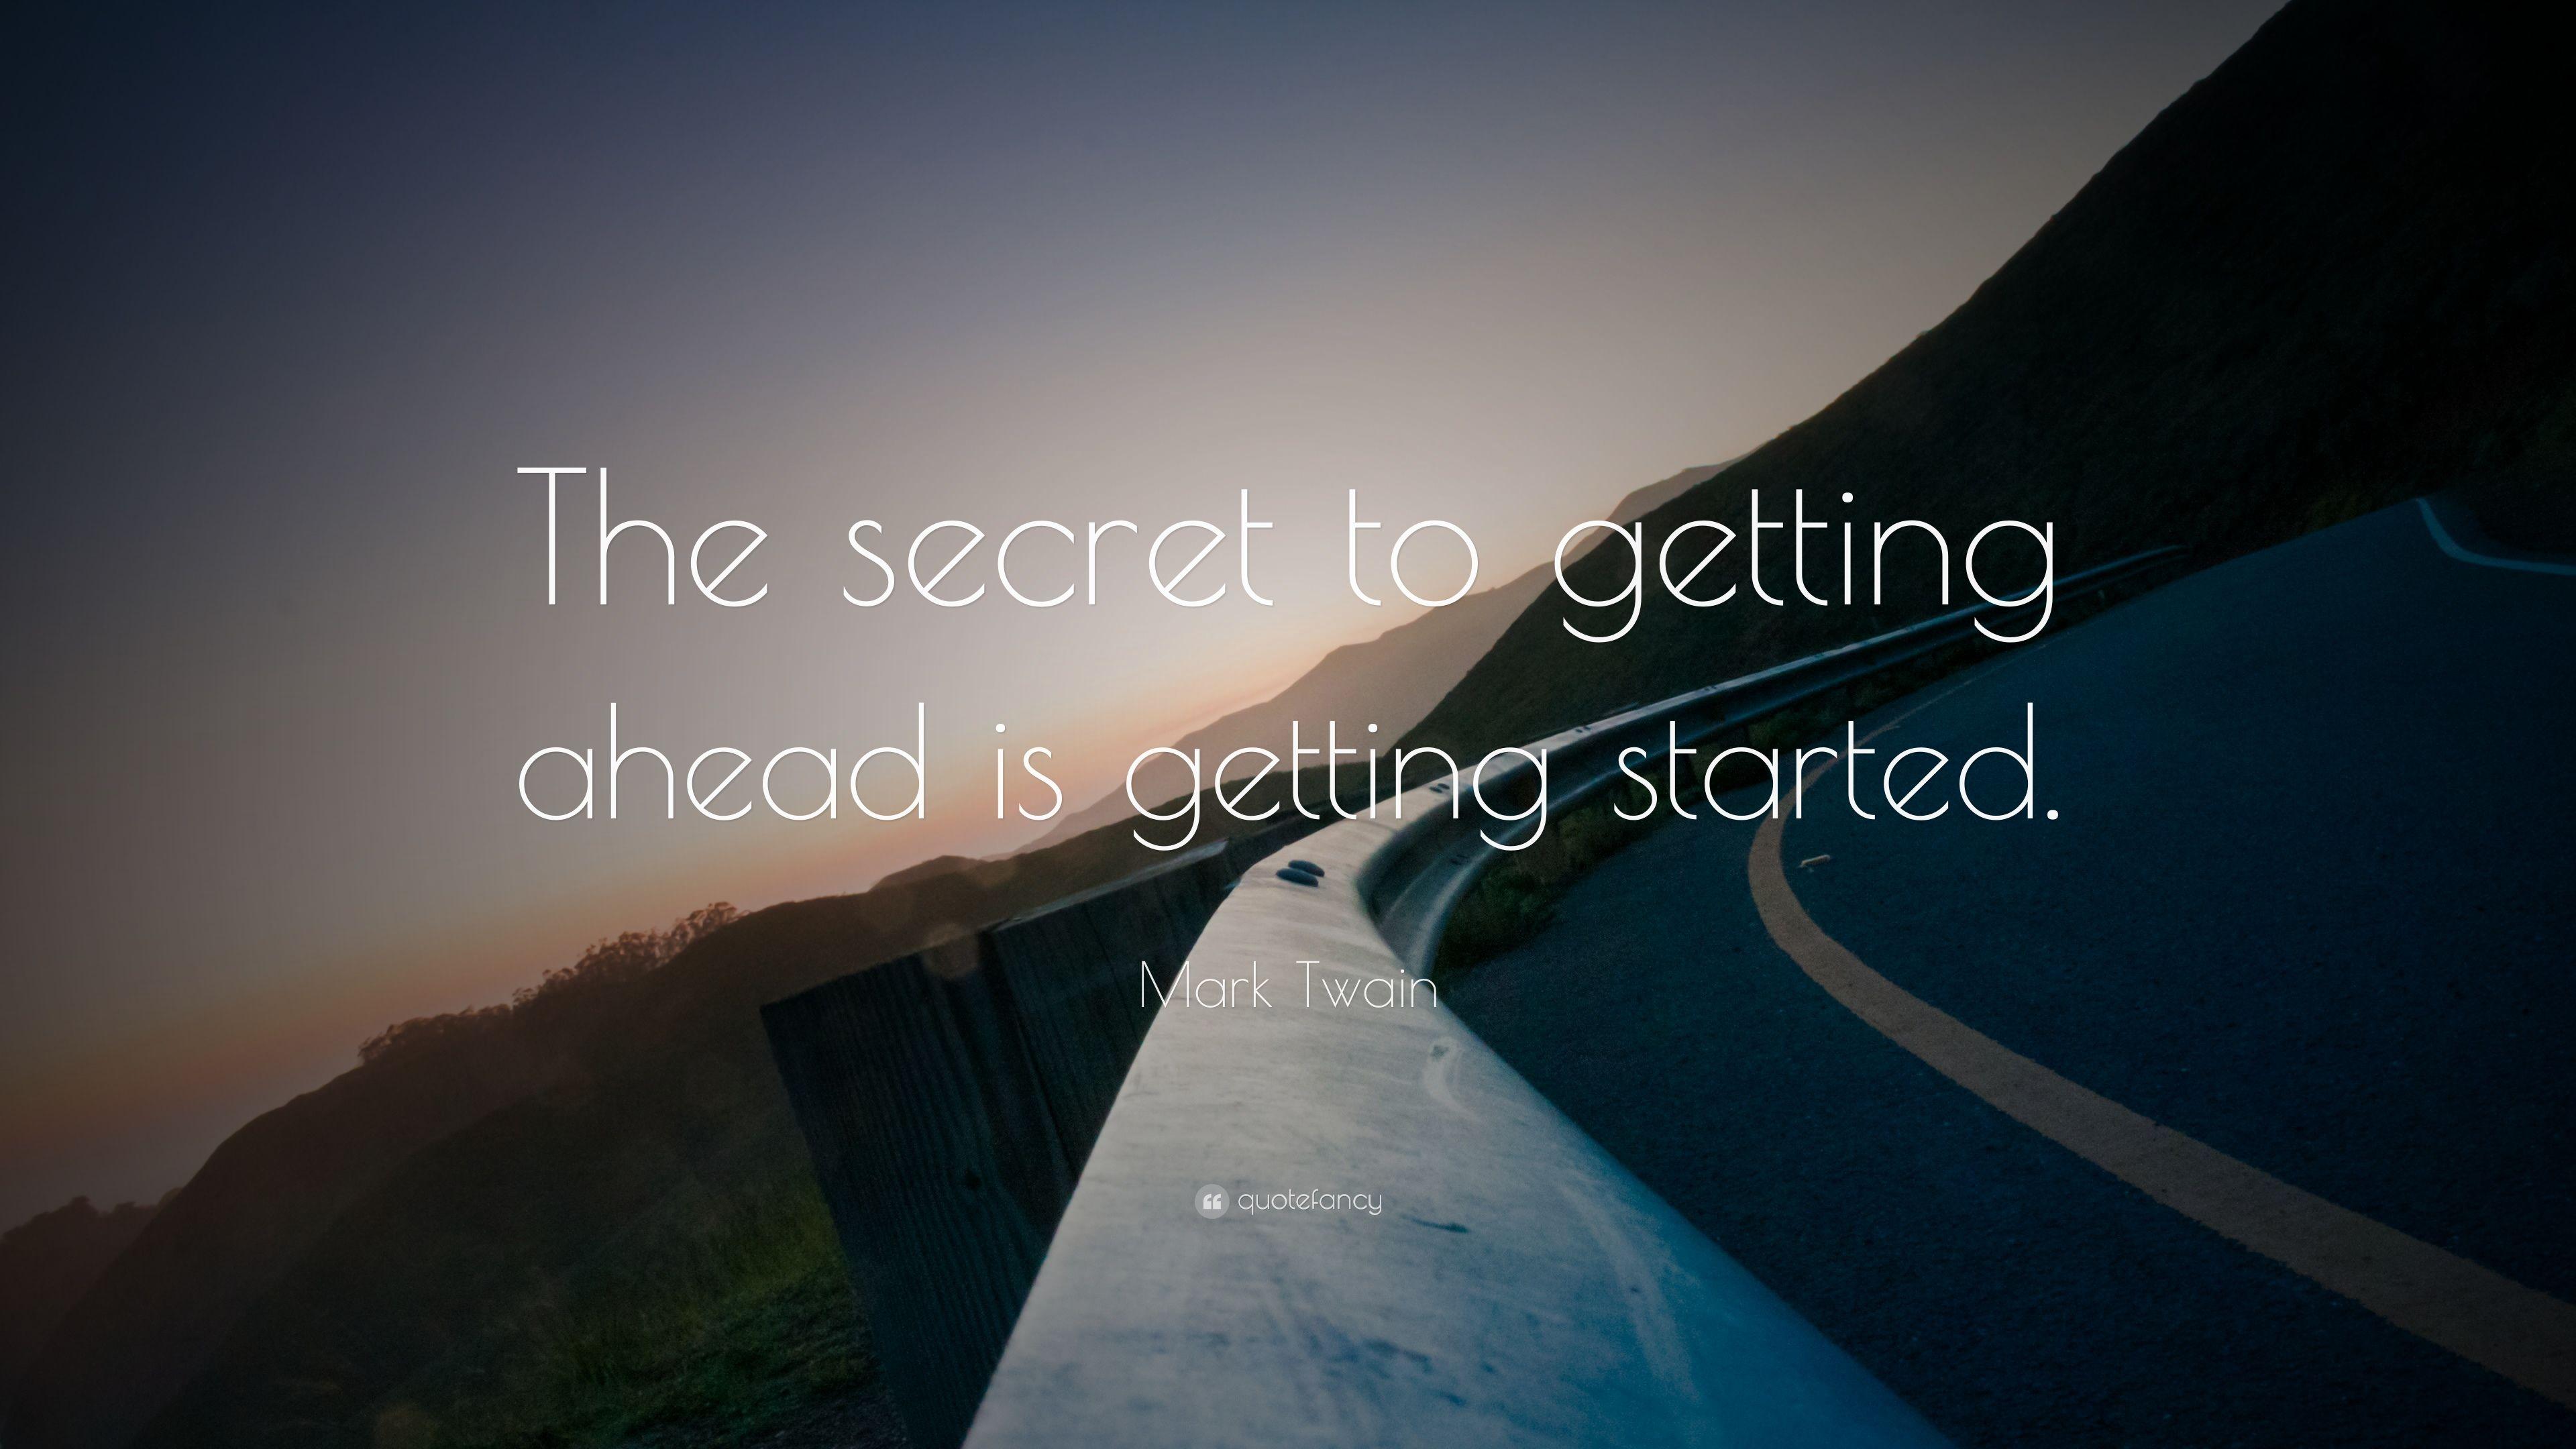 Mark Twain Quote: “The secret to getting ahead is getting started